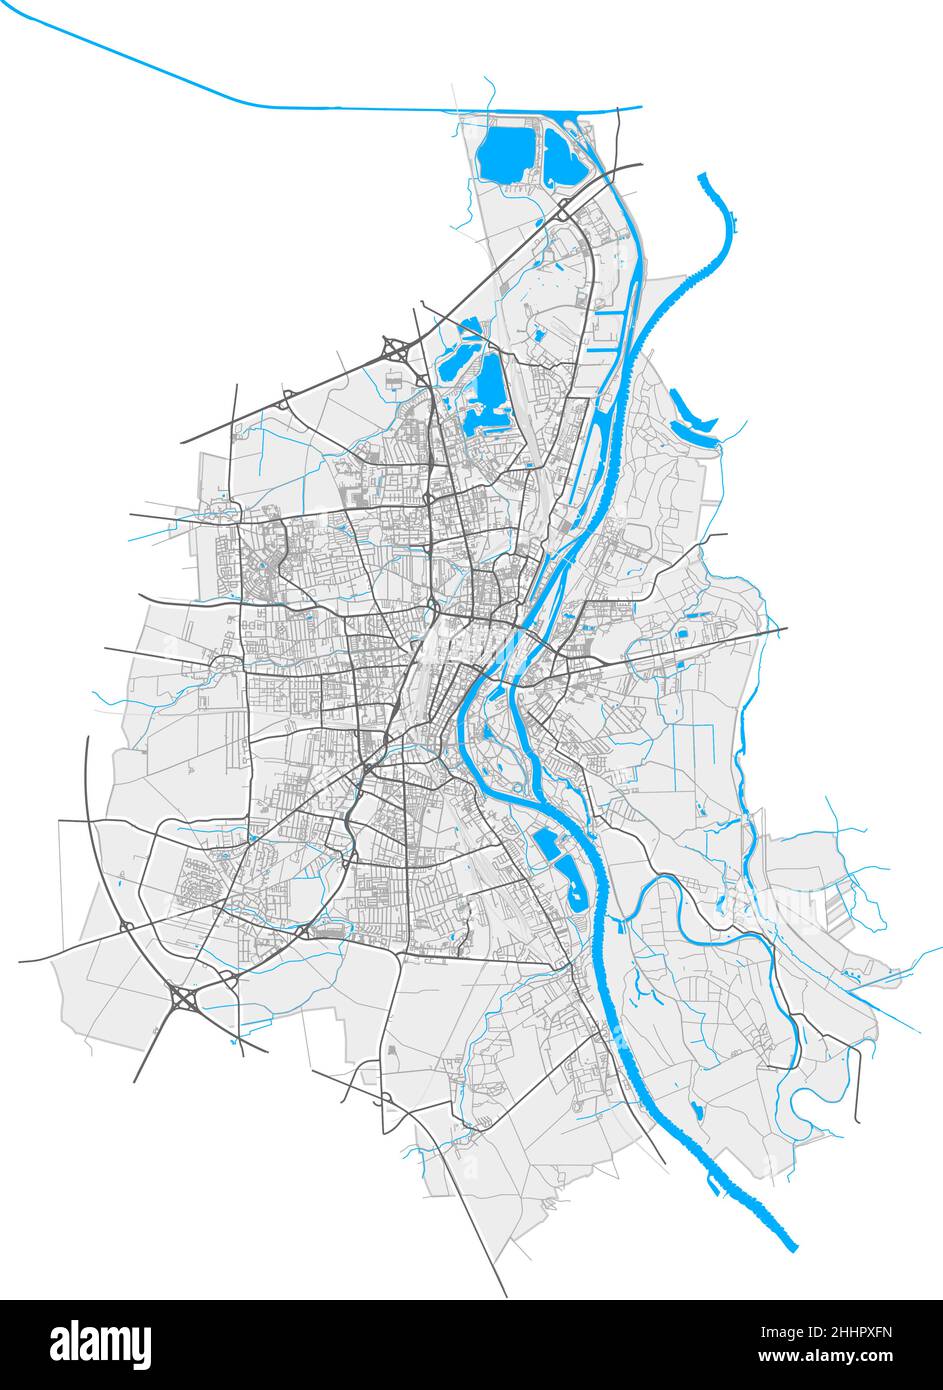 Magdeburg, Saxony-Anhalt, Germany high resolution vector map with city boundaries and editable paths. White outlines for main roads. Many detailed pat Stock Vector